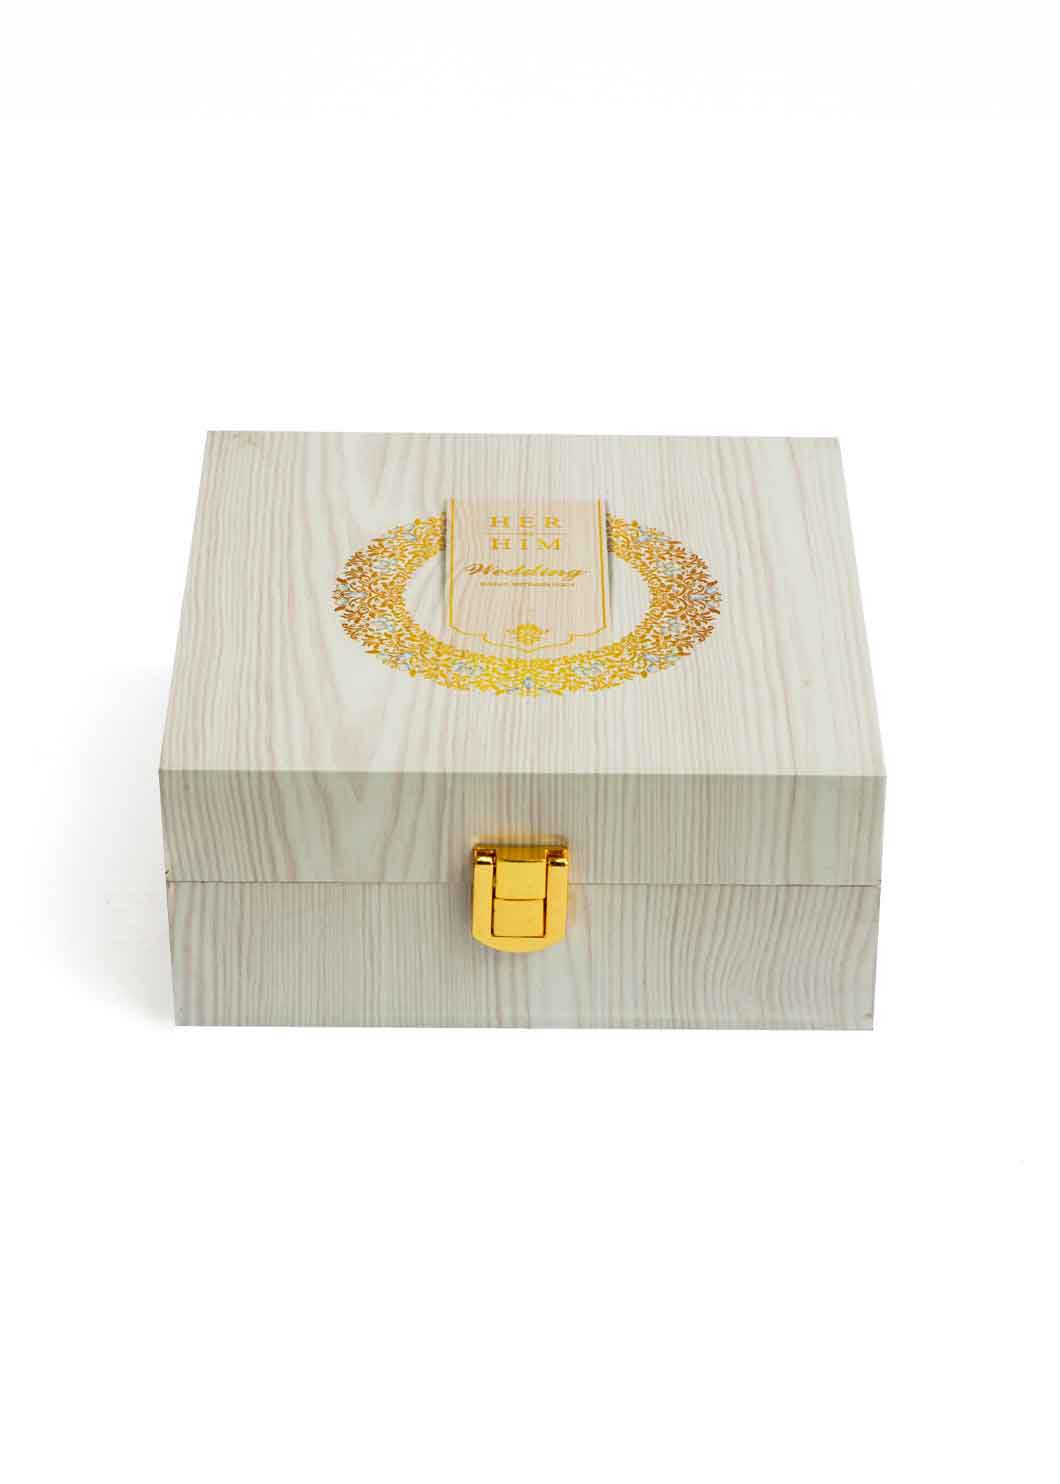 Premium Wooden Box | Square Shape Wooden Box | Wedding Ring Box | Wedding gift for married couple Couples witnesses | Bidhbox